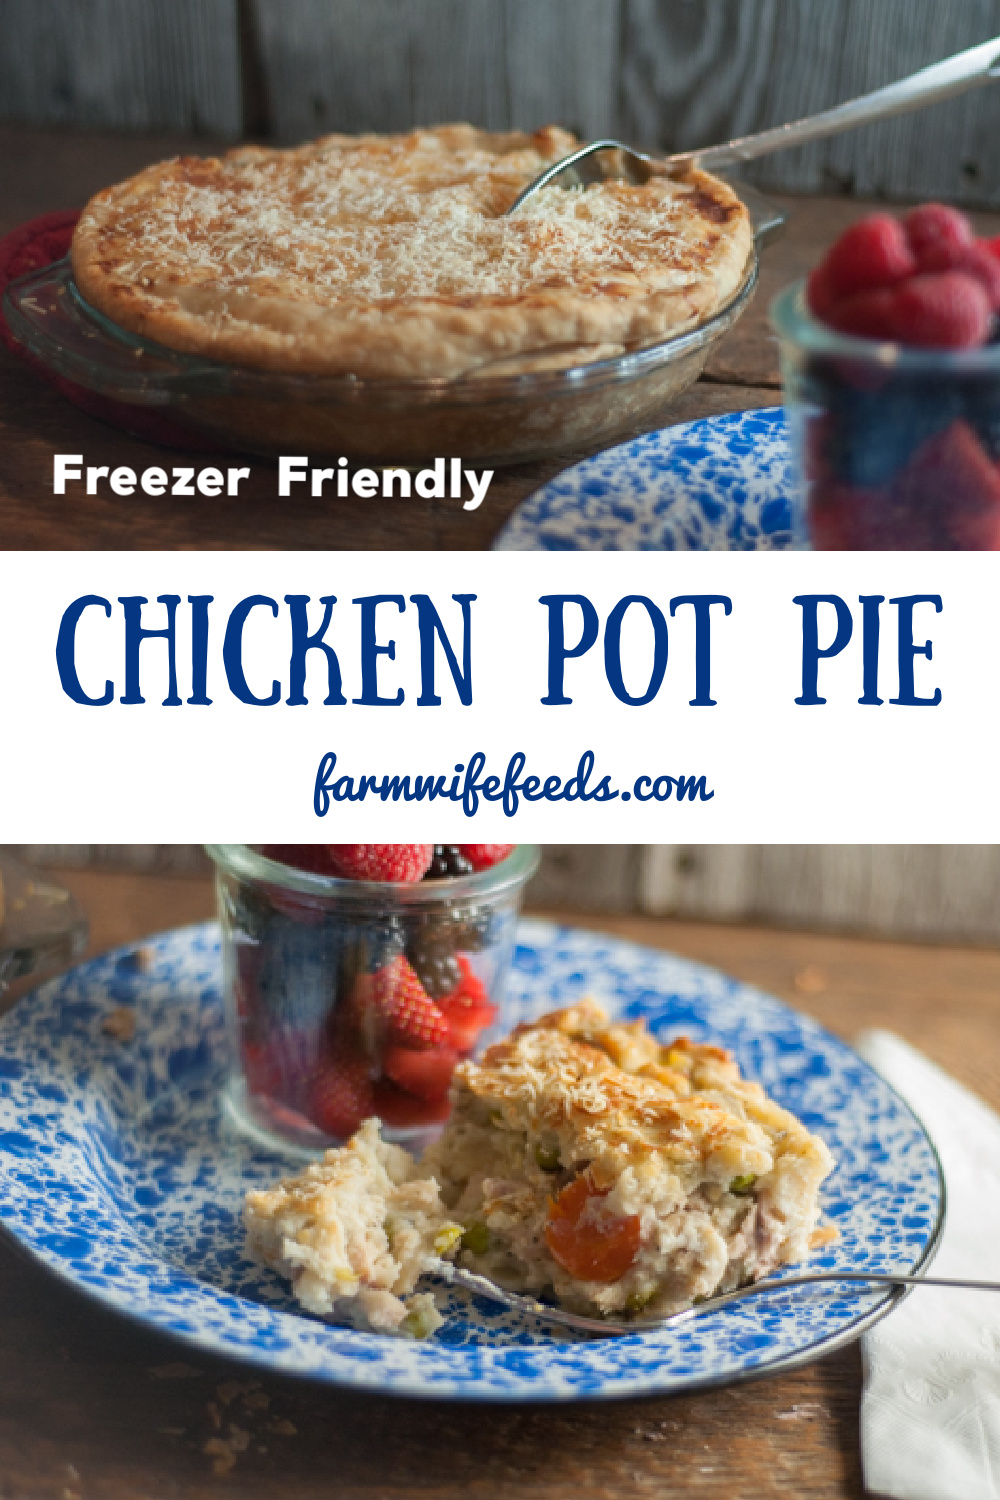 Chicken Pot Pie from Farmwife Feeds. A classic comfort food that is a freezer friendly meal prep recipe that is easily doubled. #chicken #potpie #freezermeal